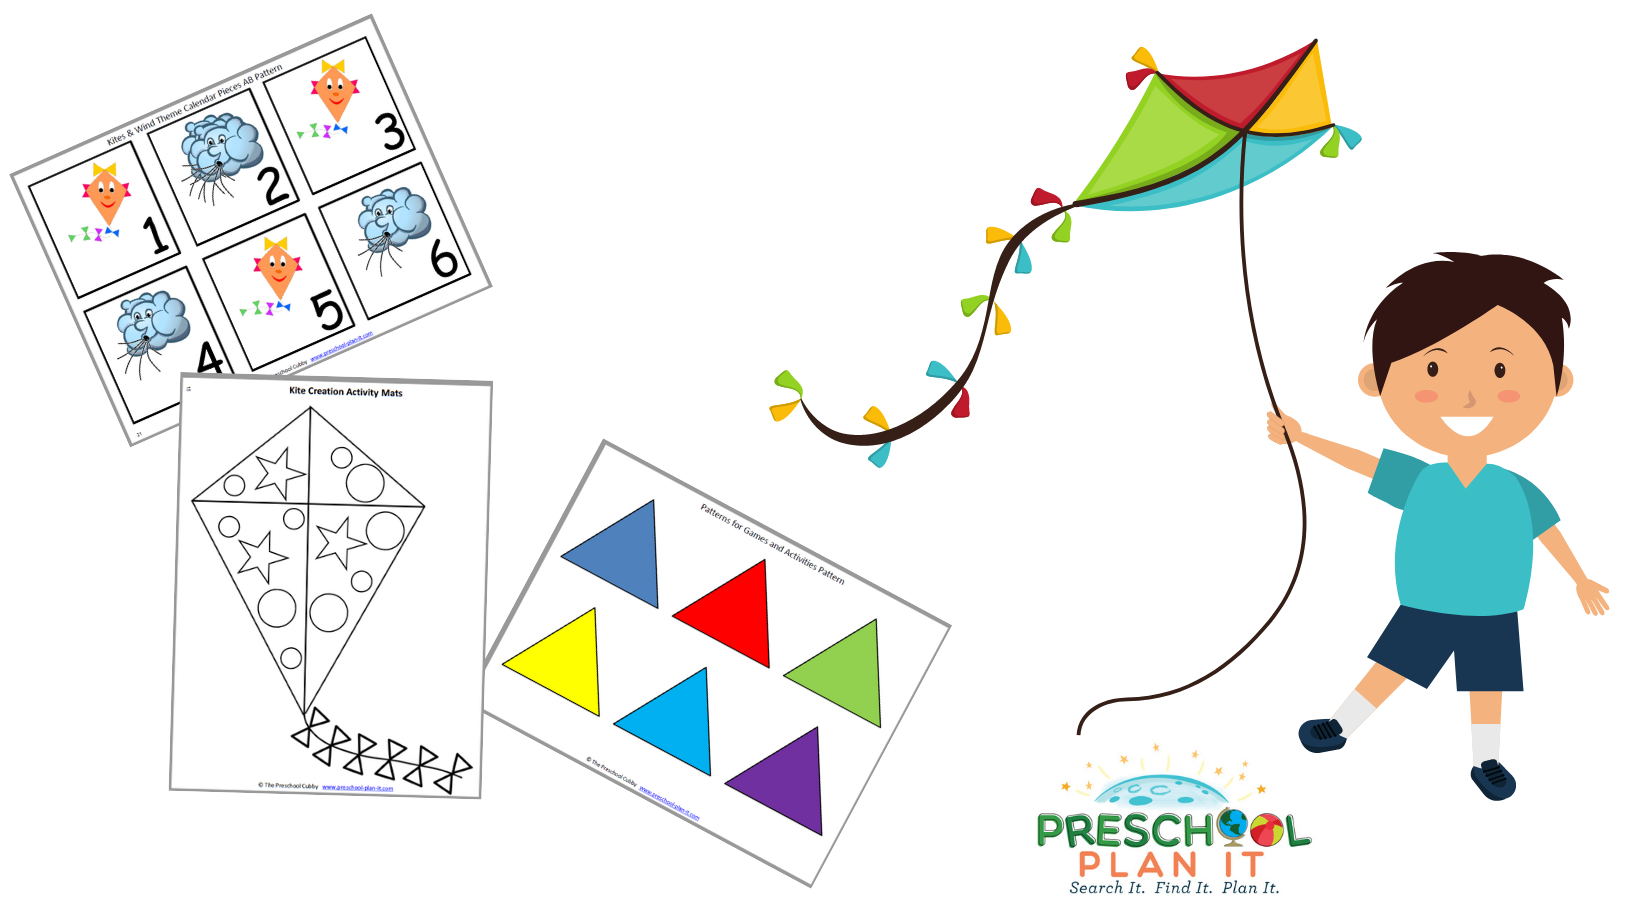 A 26 page Kites and Wind Preschool Theme resource packet to help save you planning time!